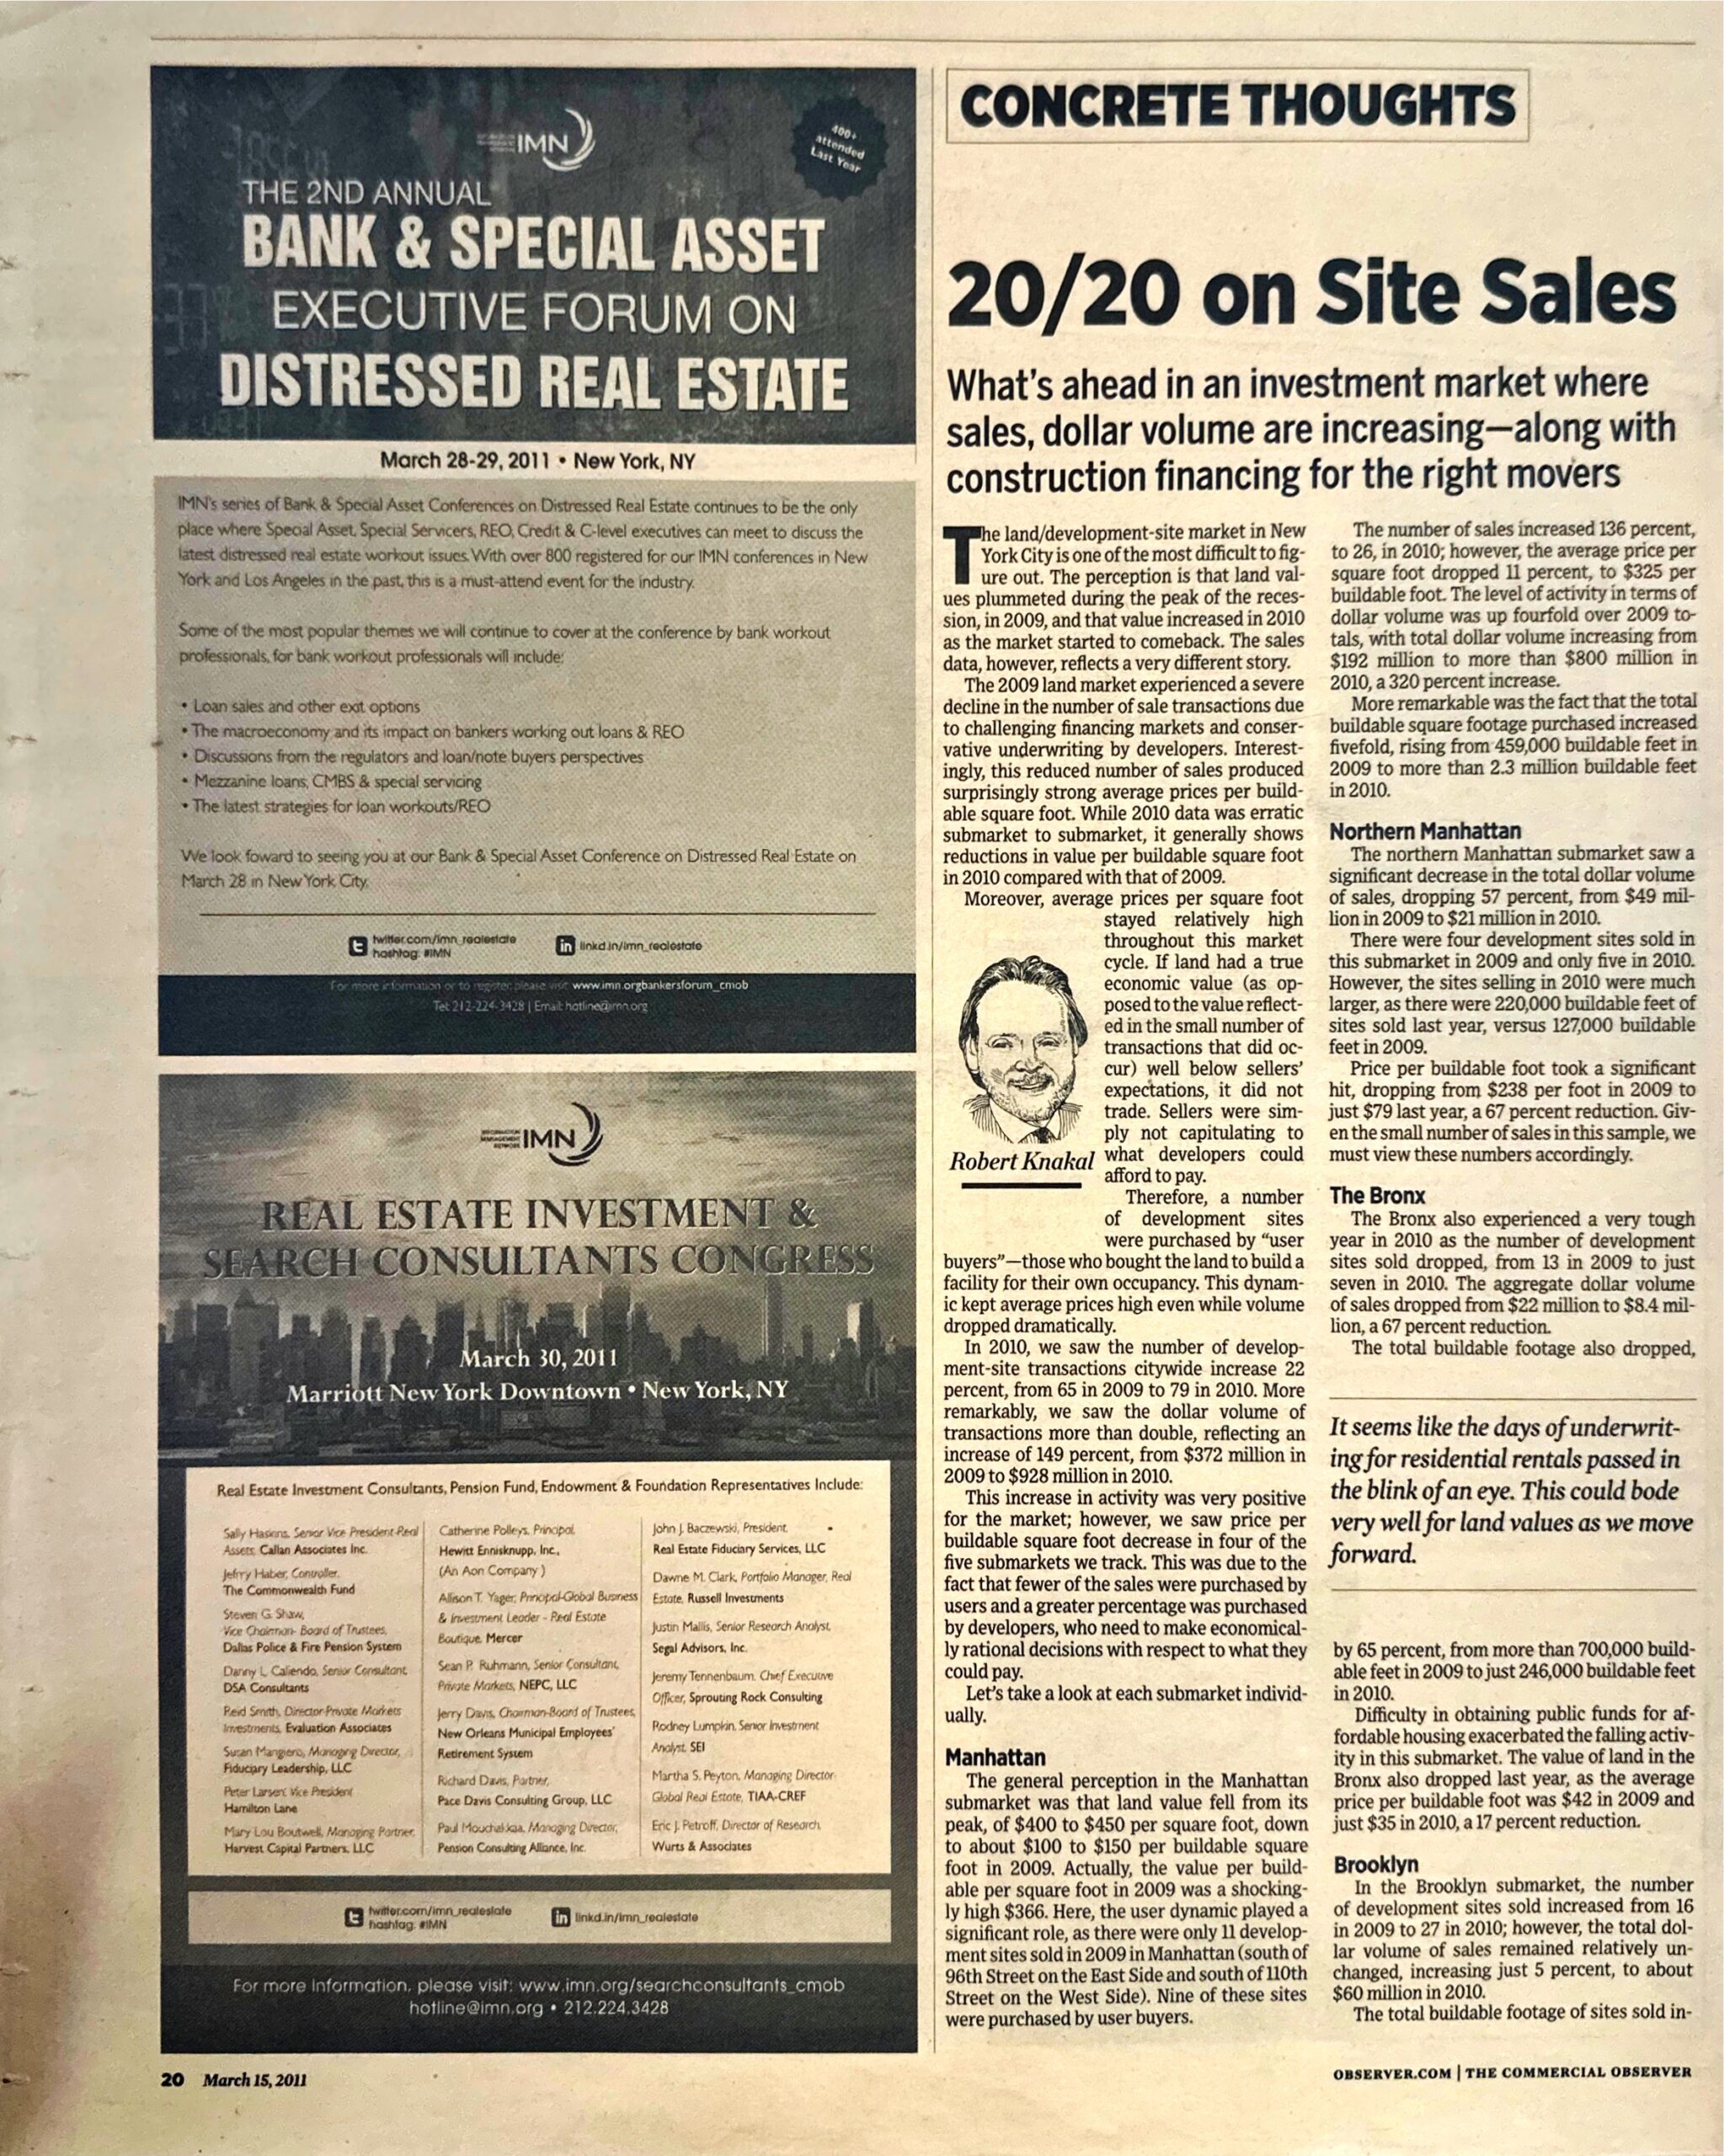 3-15 Concrete Thoughts - 2020 on Site Sales - March 15 2011